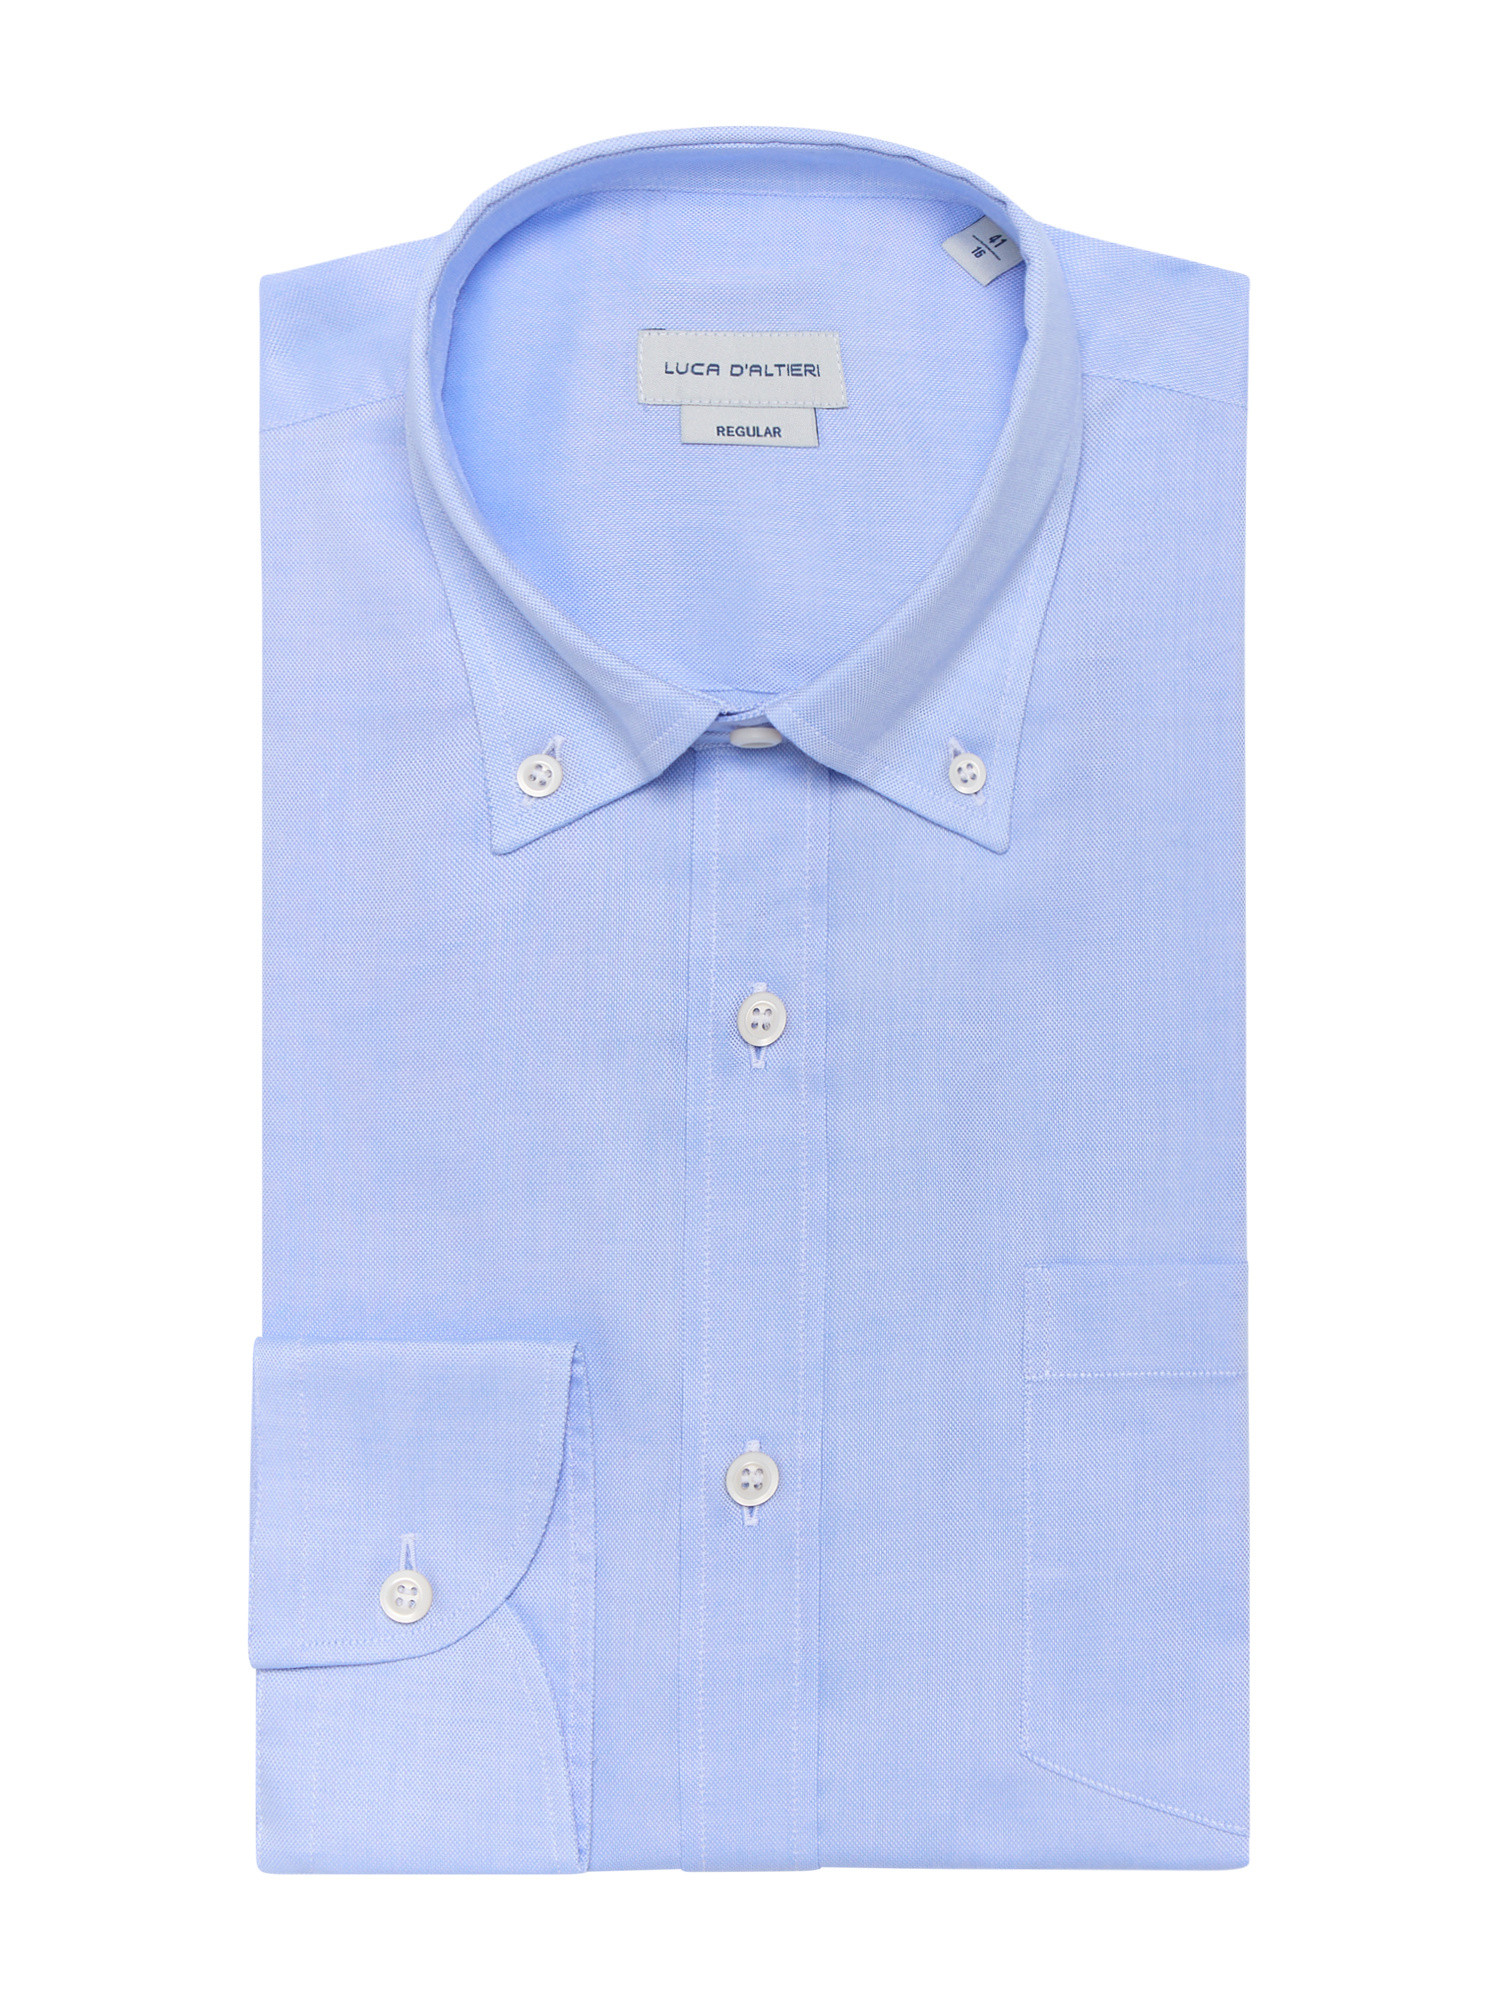 Luca D'Altieri - Regular fit casual shirt in pure cotton oxford, Light Blue, large image number 0